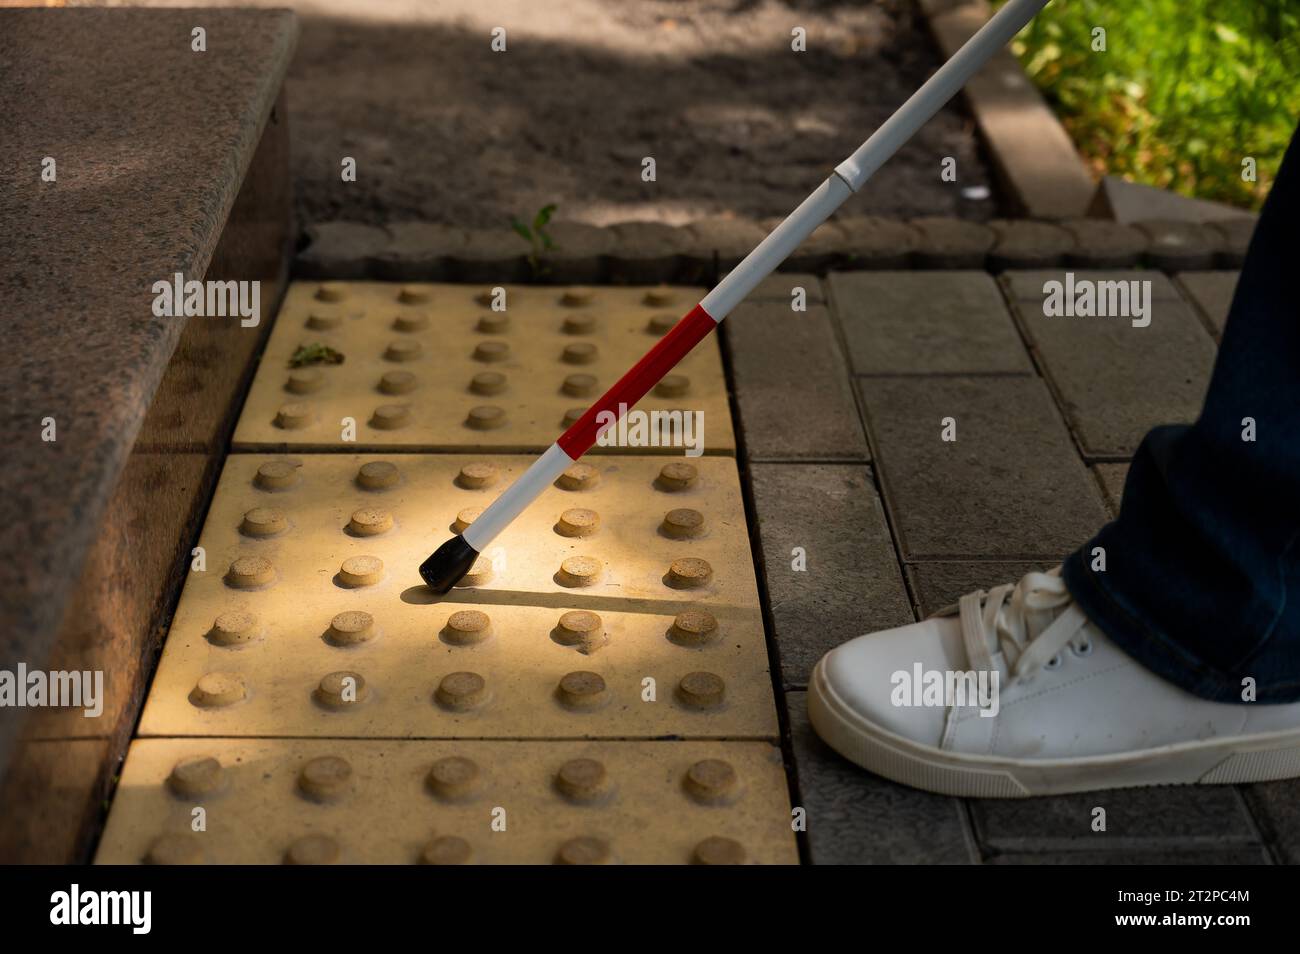 Close-up of female foot, walking stick and tactile tiles. Blind woman climbing stairs using a cane.  Stock Photo